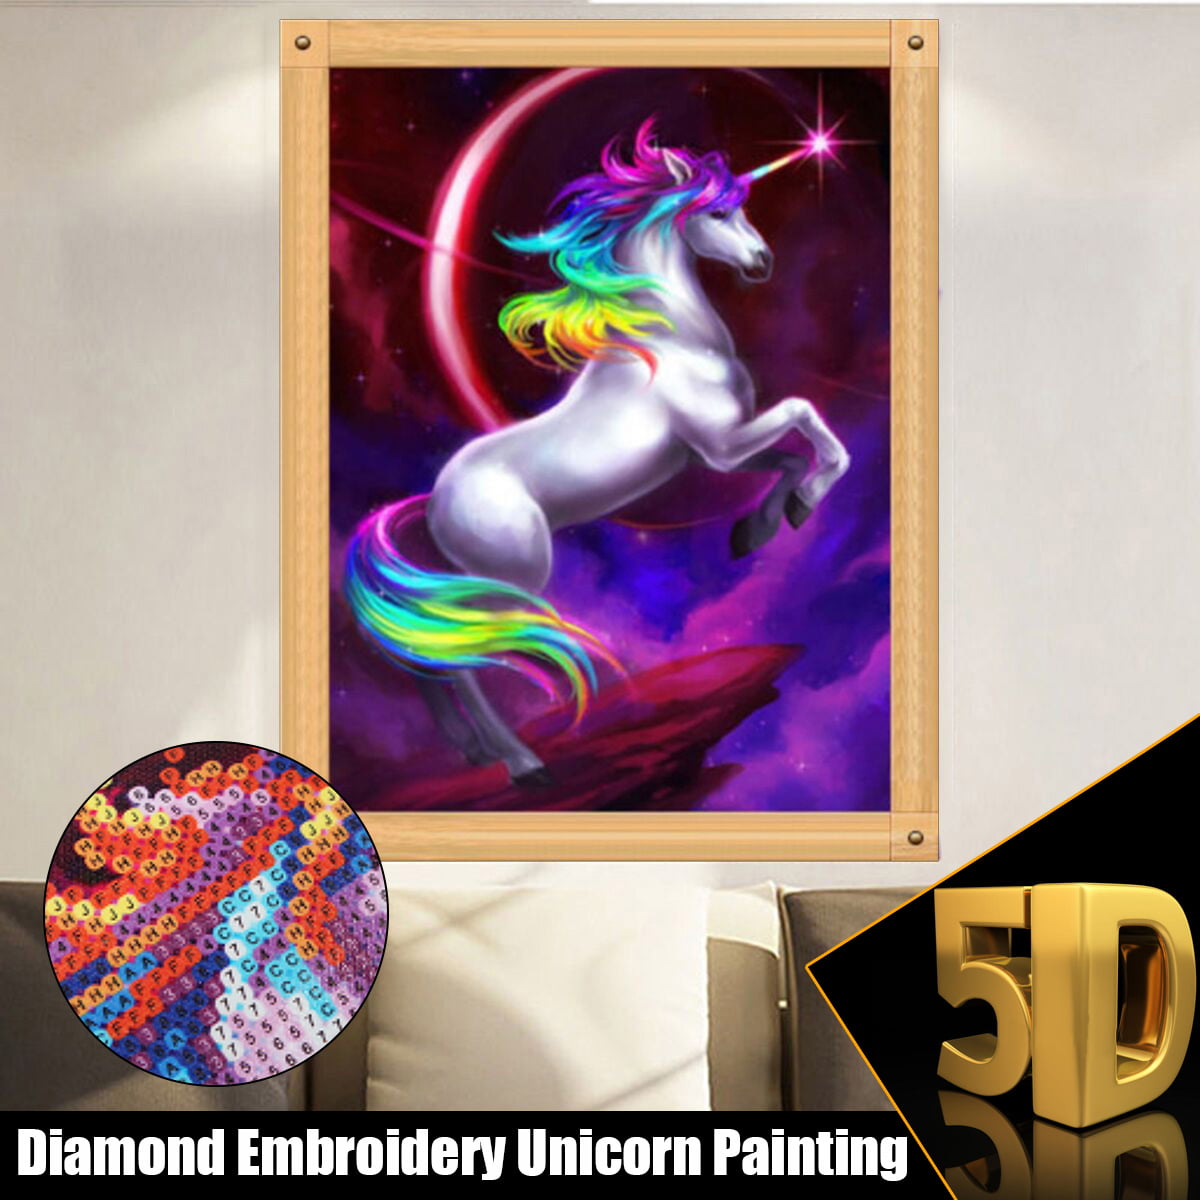 Crystal Rhinestone Diamond Embroidery Paintings Pictures Arts Craft for Home Wall Decor SODIAL DIY 5D Diamond Painting by Number Kits Full Drill,Colorful Starry Sky Music Notation